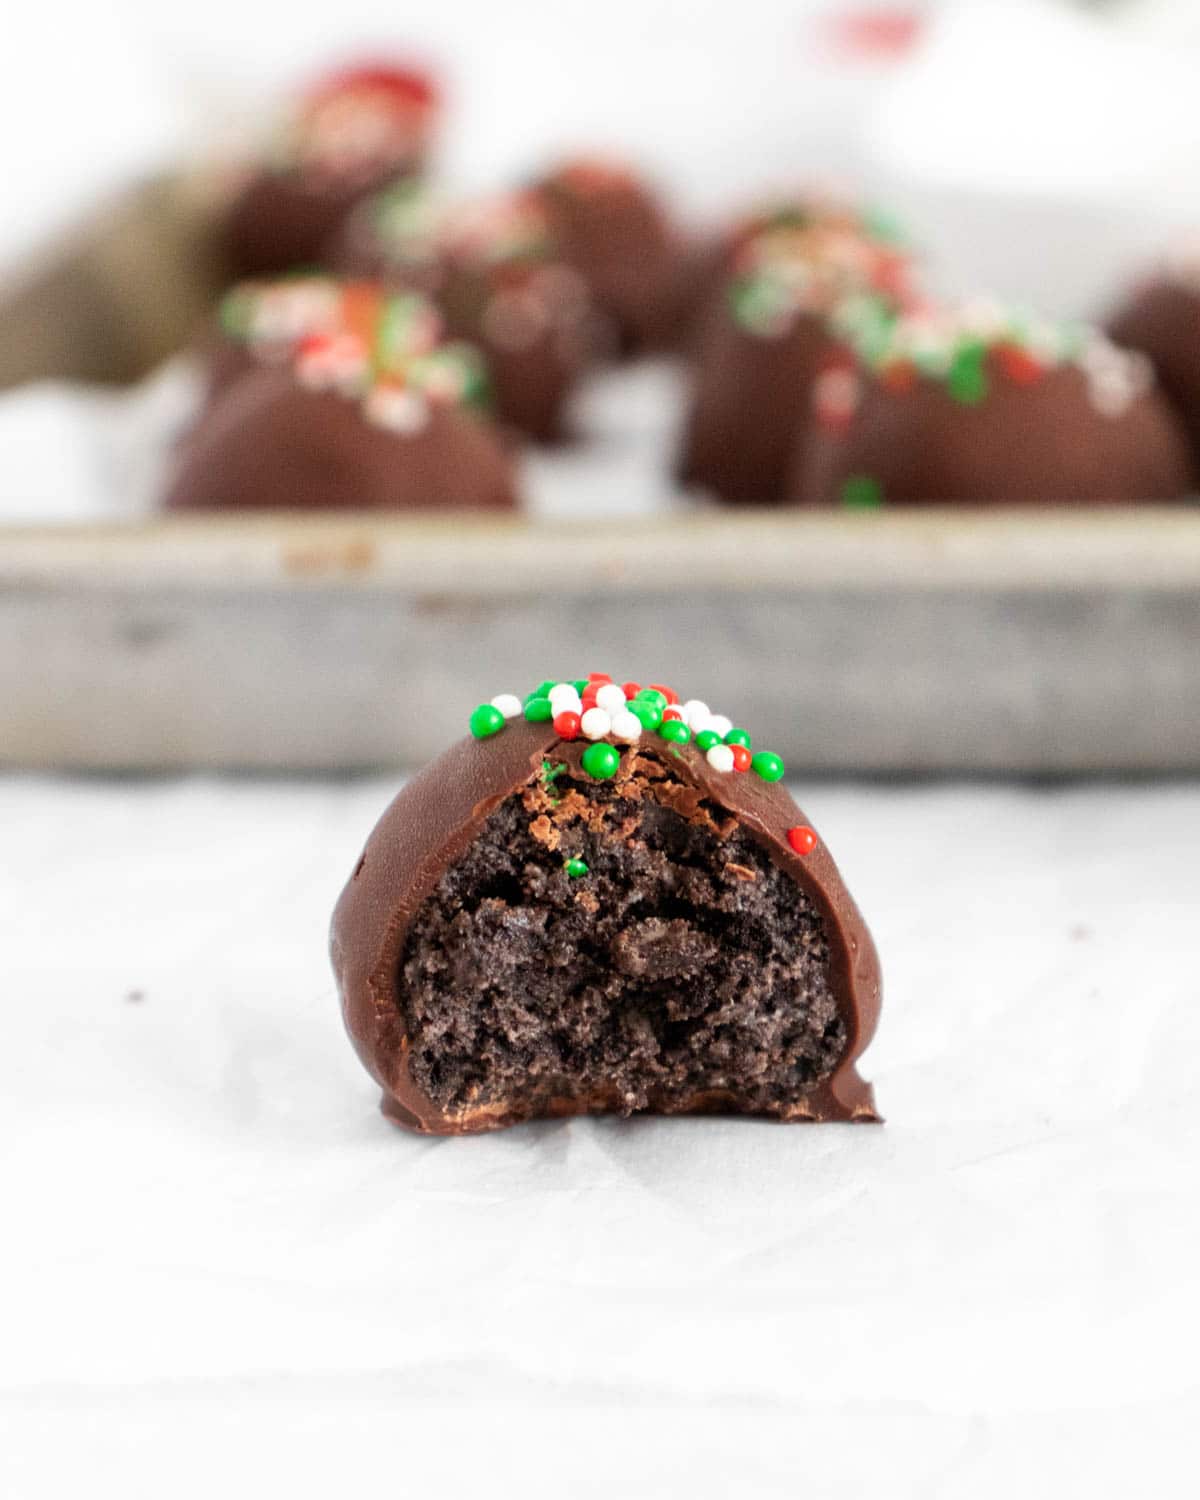 One Oreo truffle with a bite out of it with a pile of Oreo truffles in the back